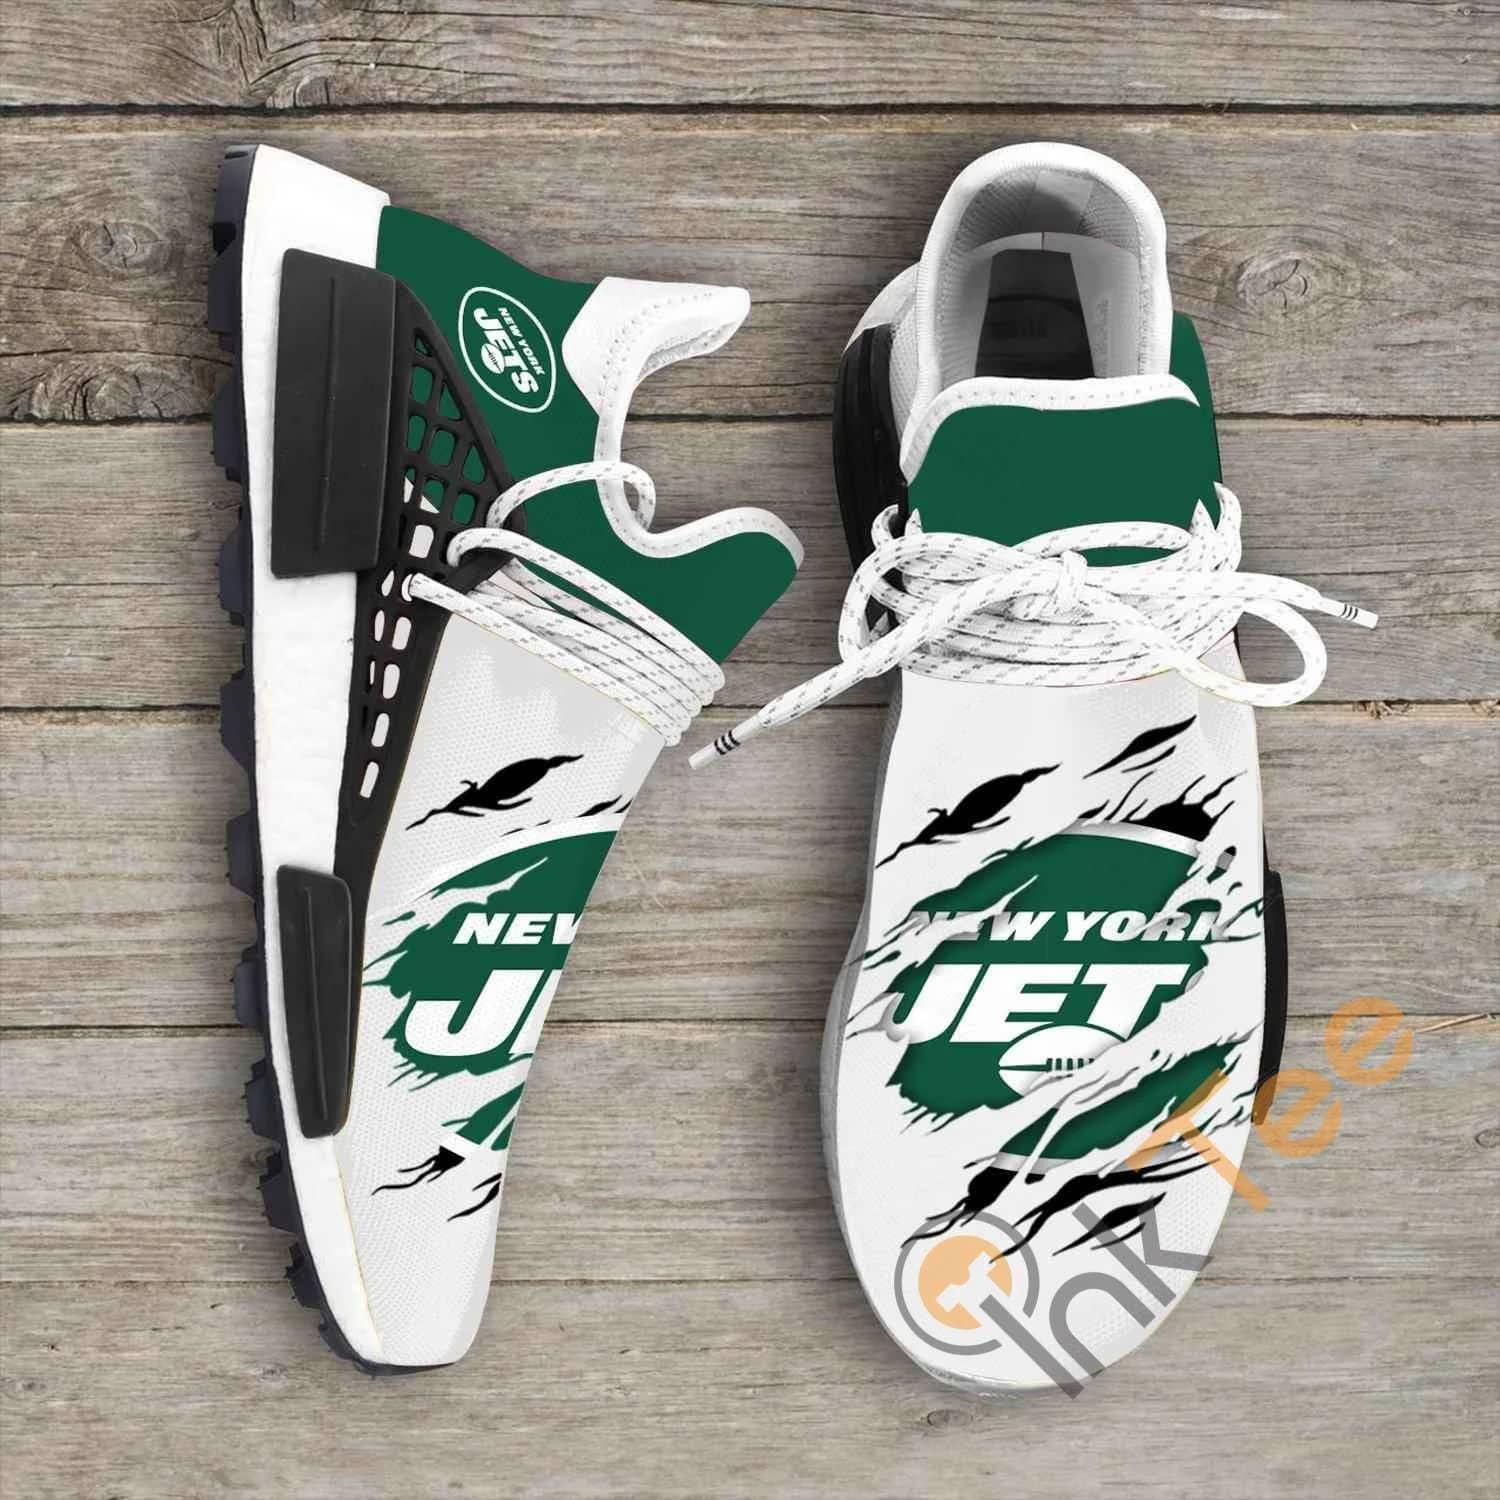 New York Jets Nfl Sport Teams NMD Human Shoes